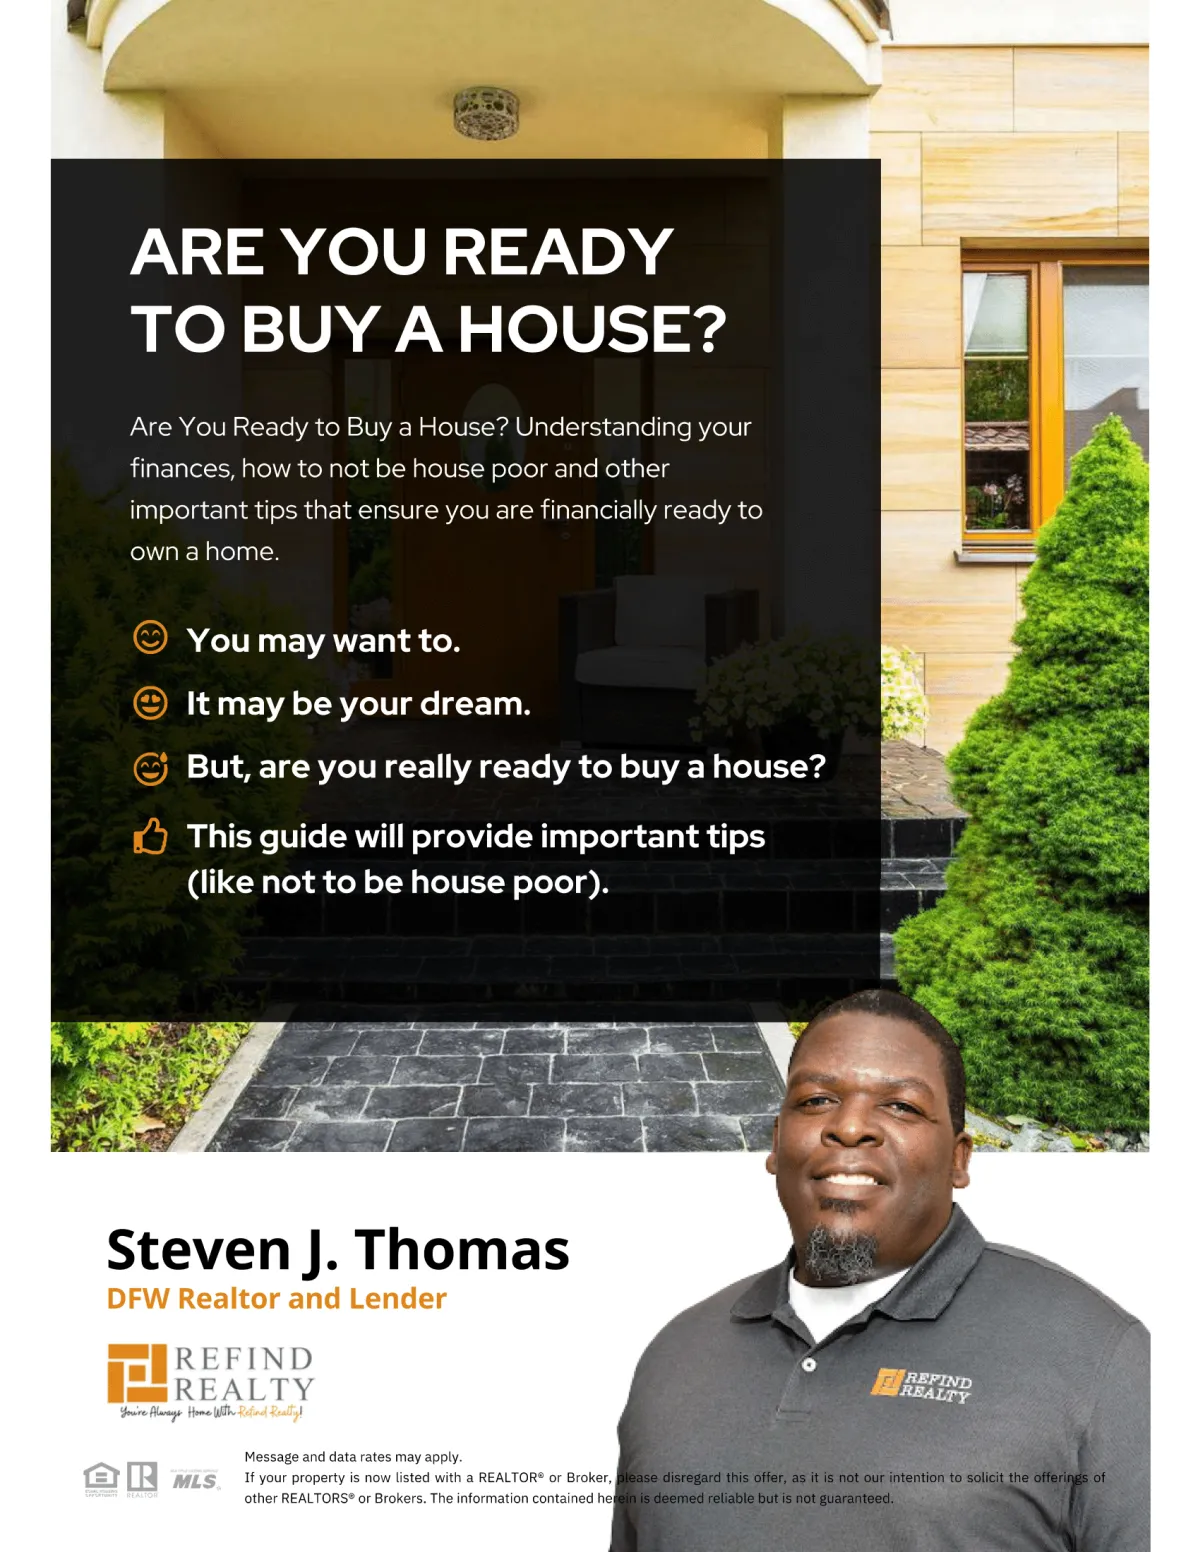 Are You Ready To Buy?